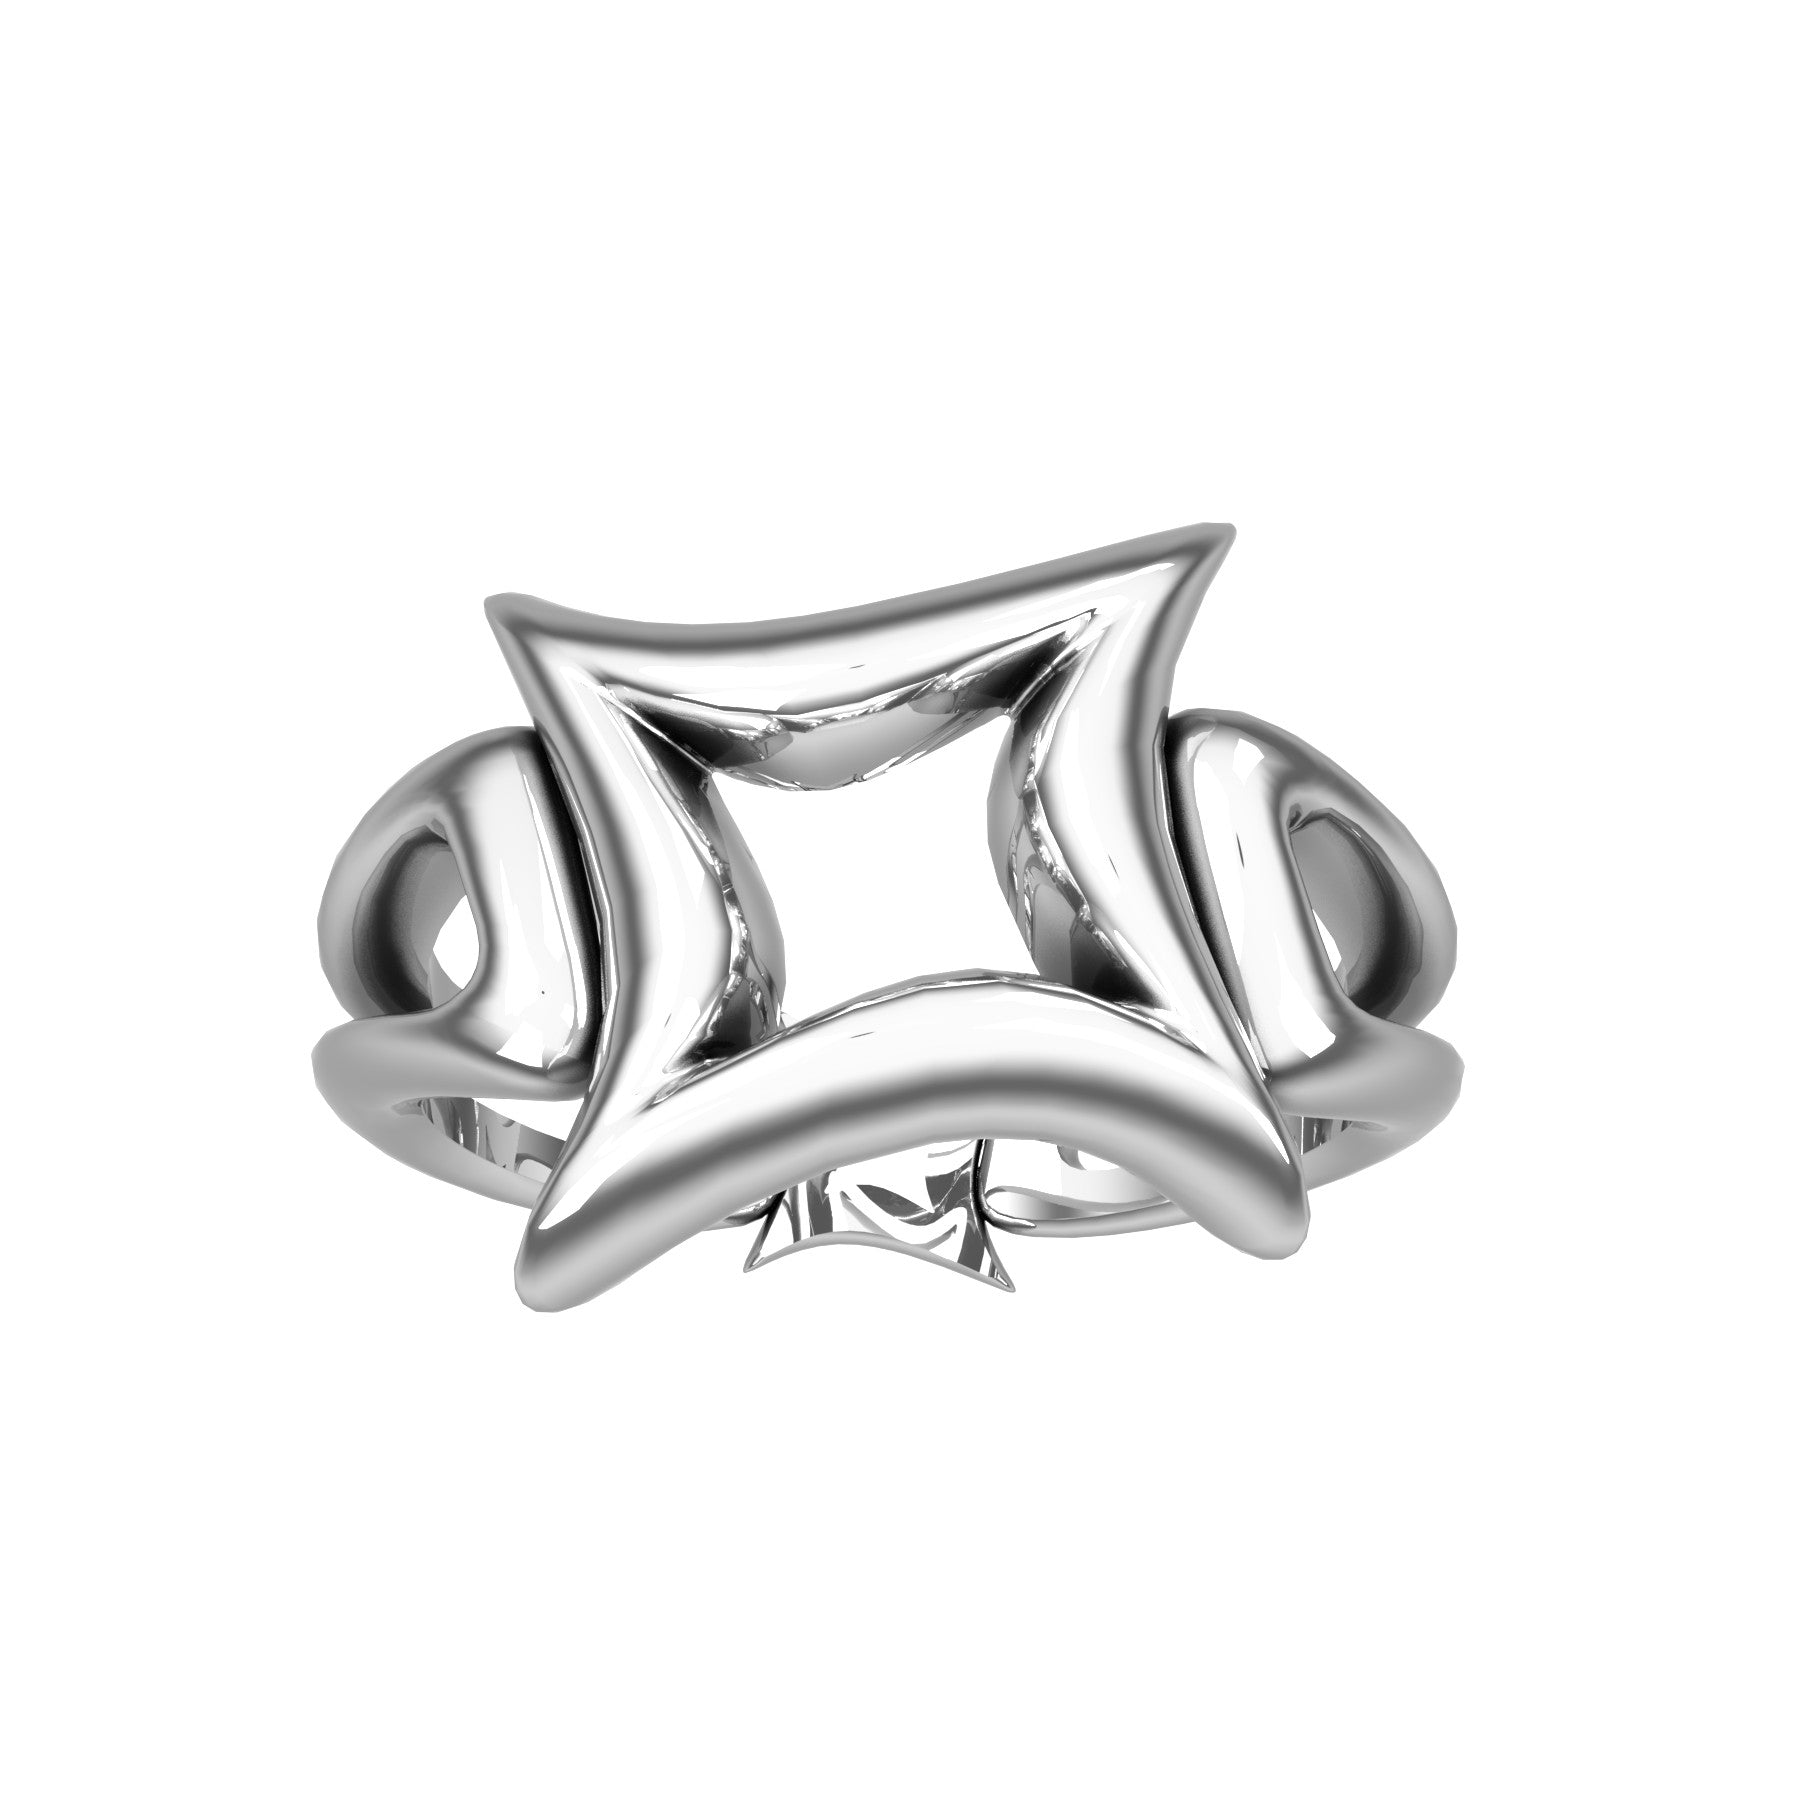 etoile bizarre ring, sterling silver, weight about 3,9 g. (0.14 oz), width 13,5 mm max